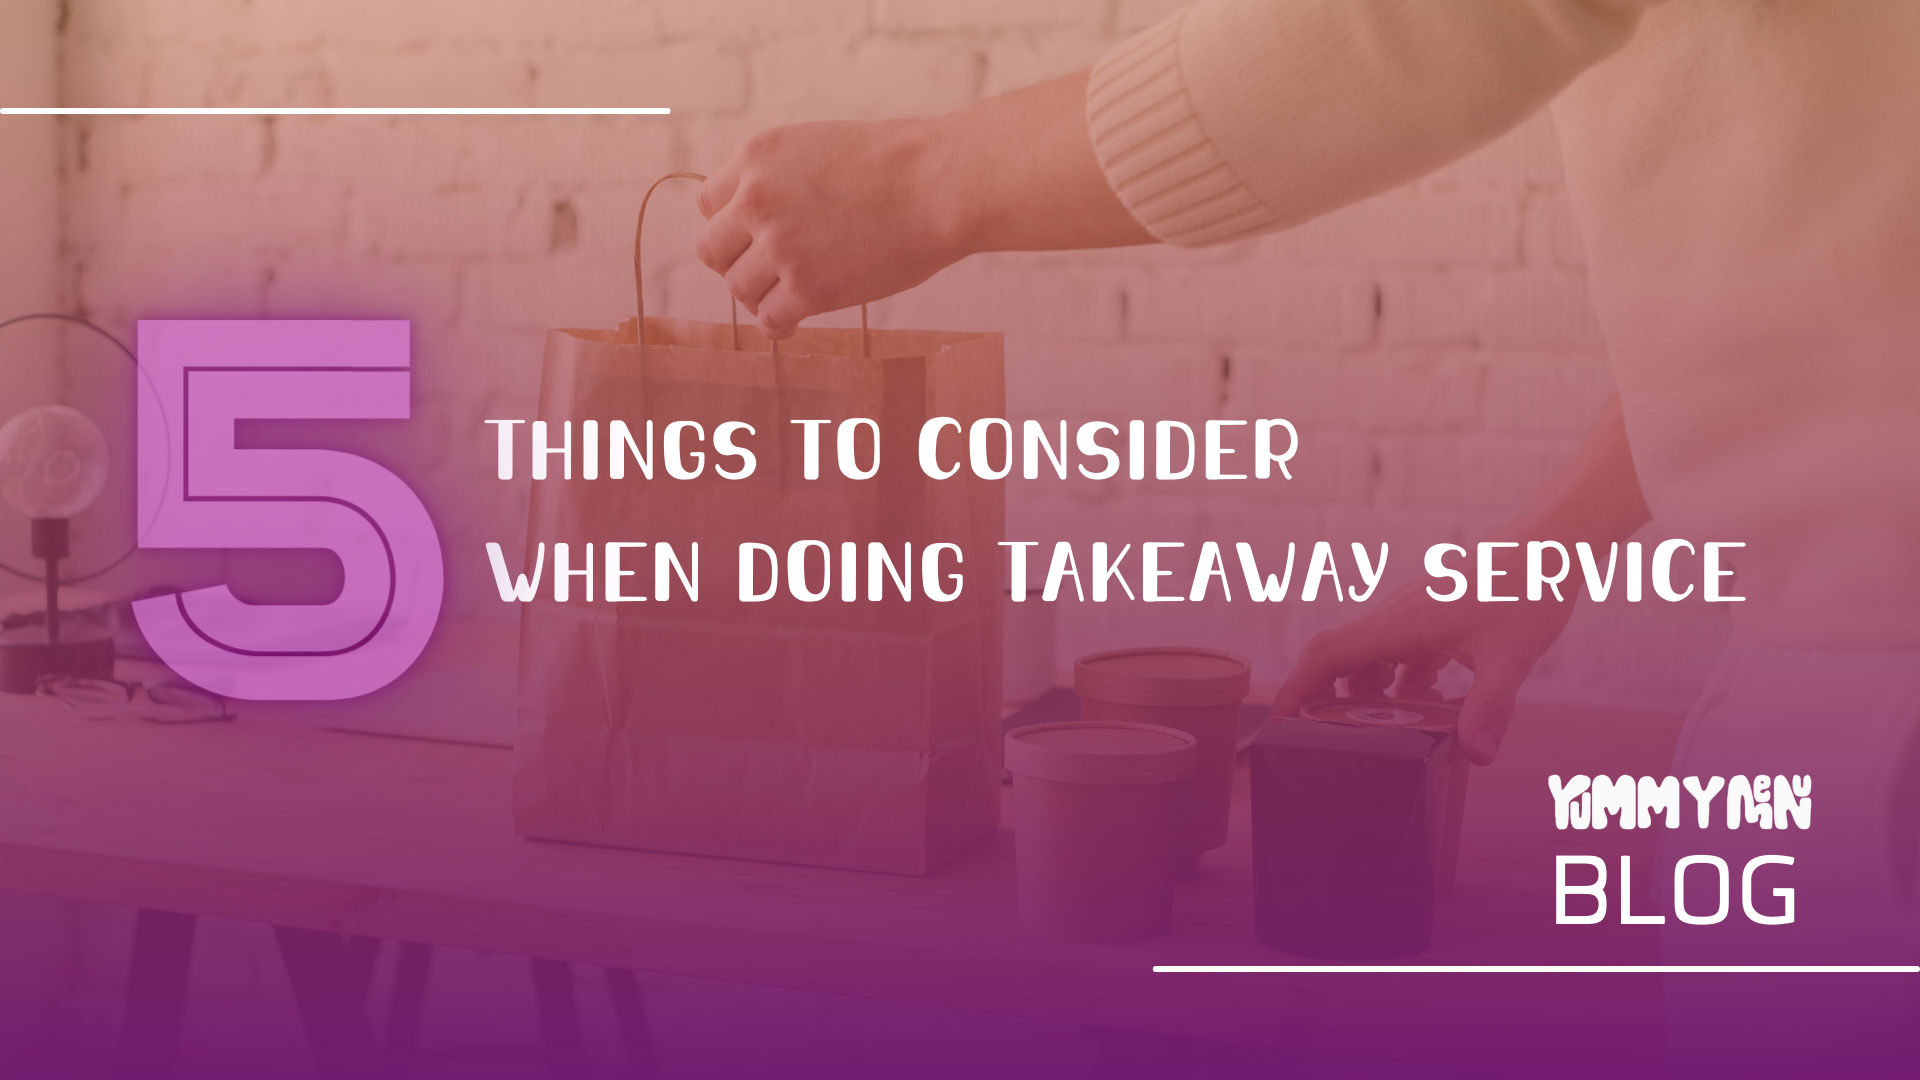 5 Things to Consider When Doing Takeaway Service